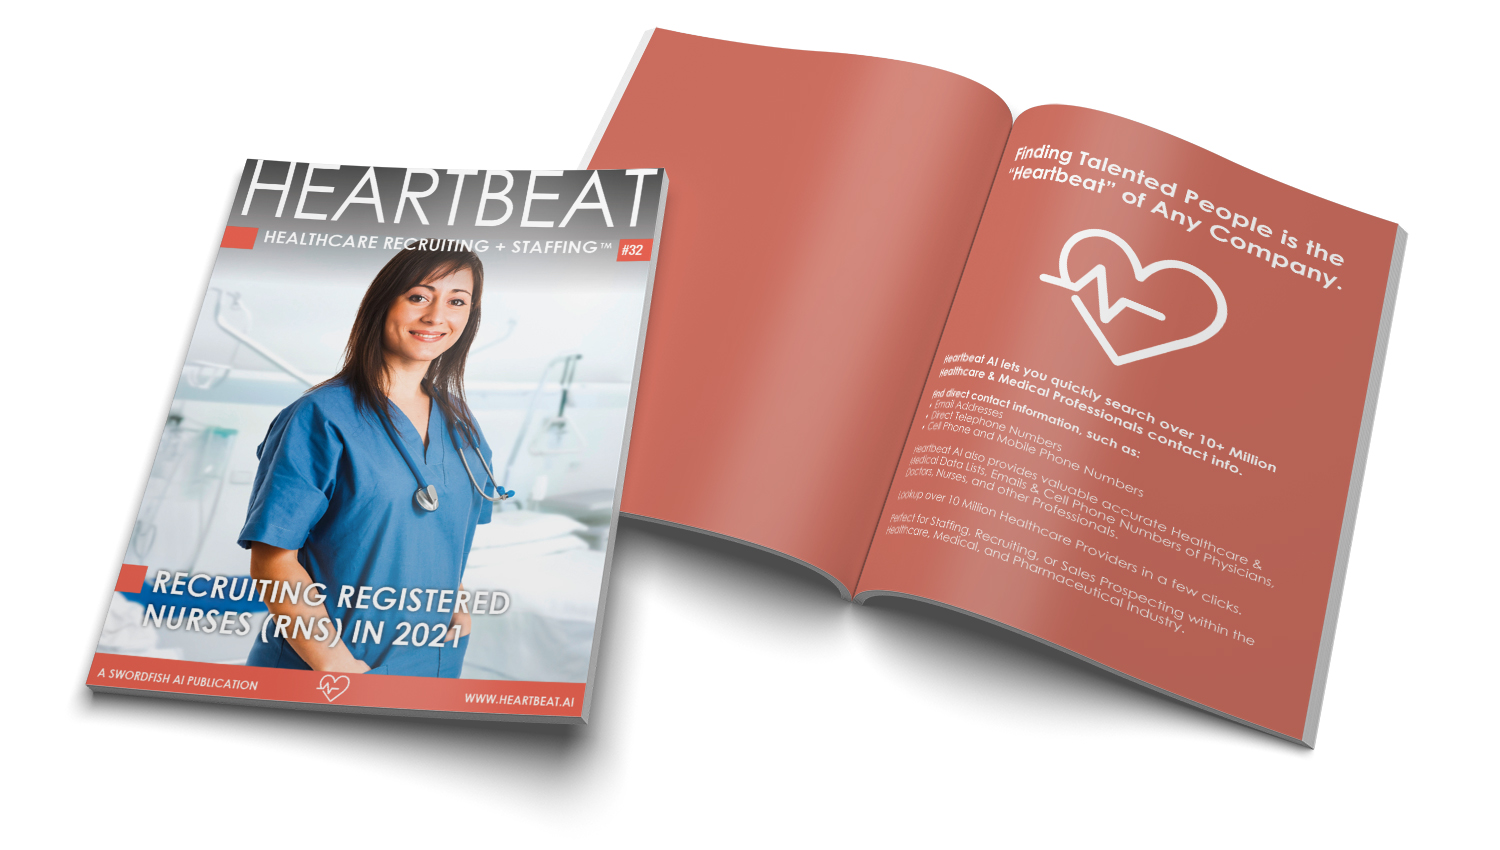 Heartbeat.ai #32 Healthcare Recruiting and Staffing. Recruiting Registered Nurses (RNs) in 2021